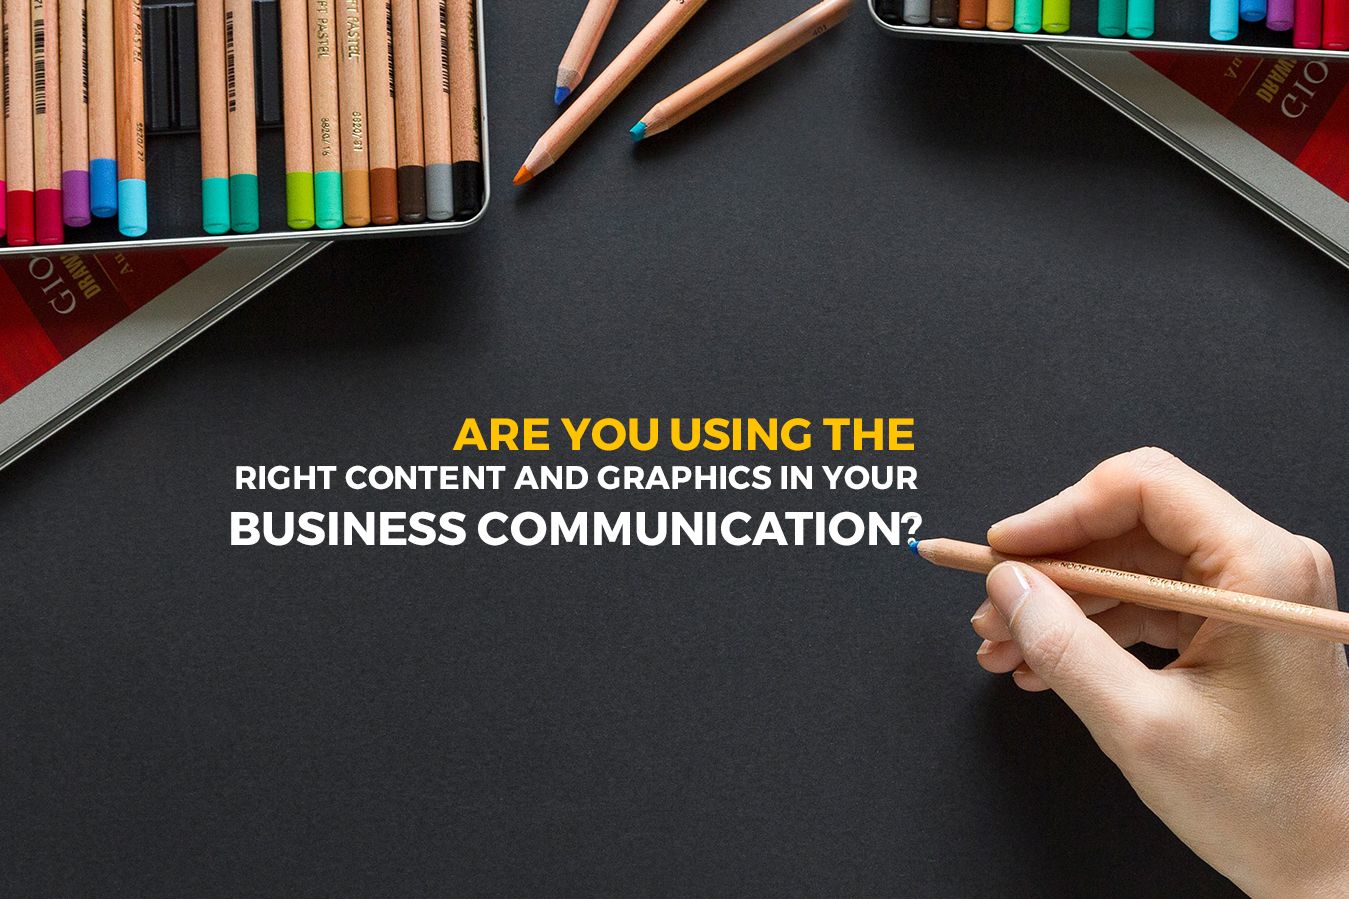 Are you using the right Content and Graphics in your Business Communication?